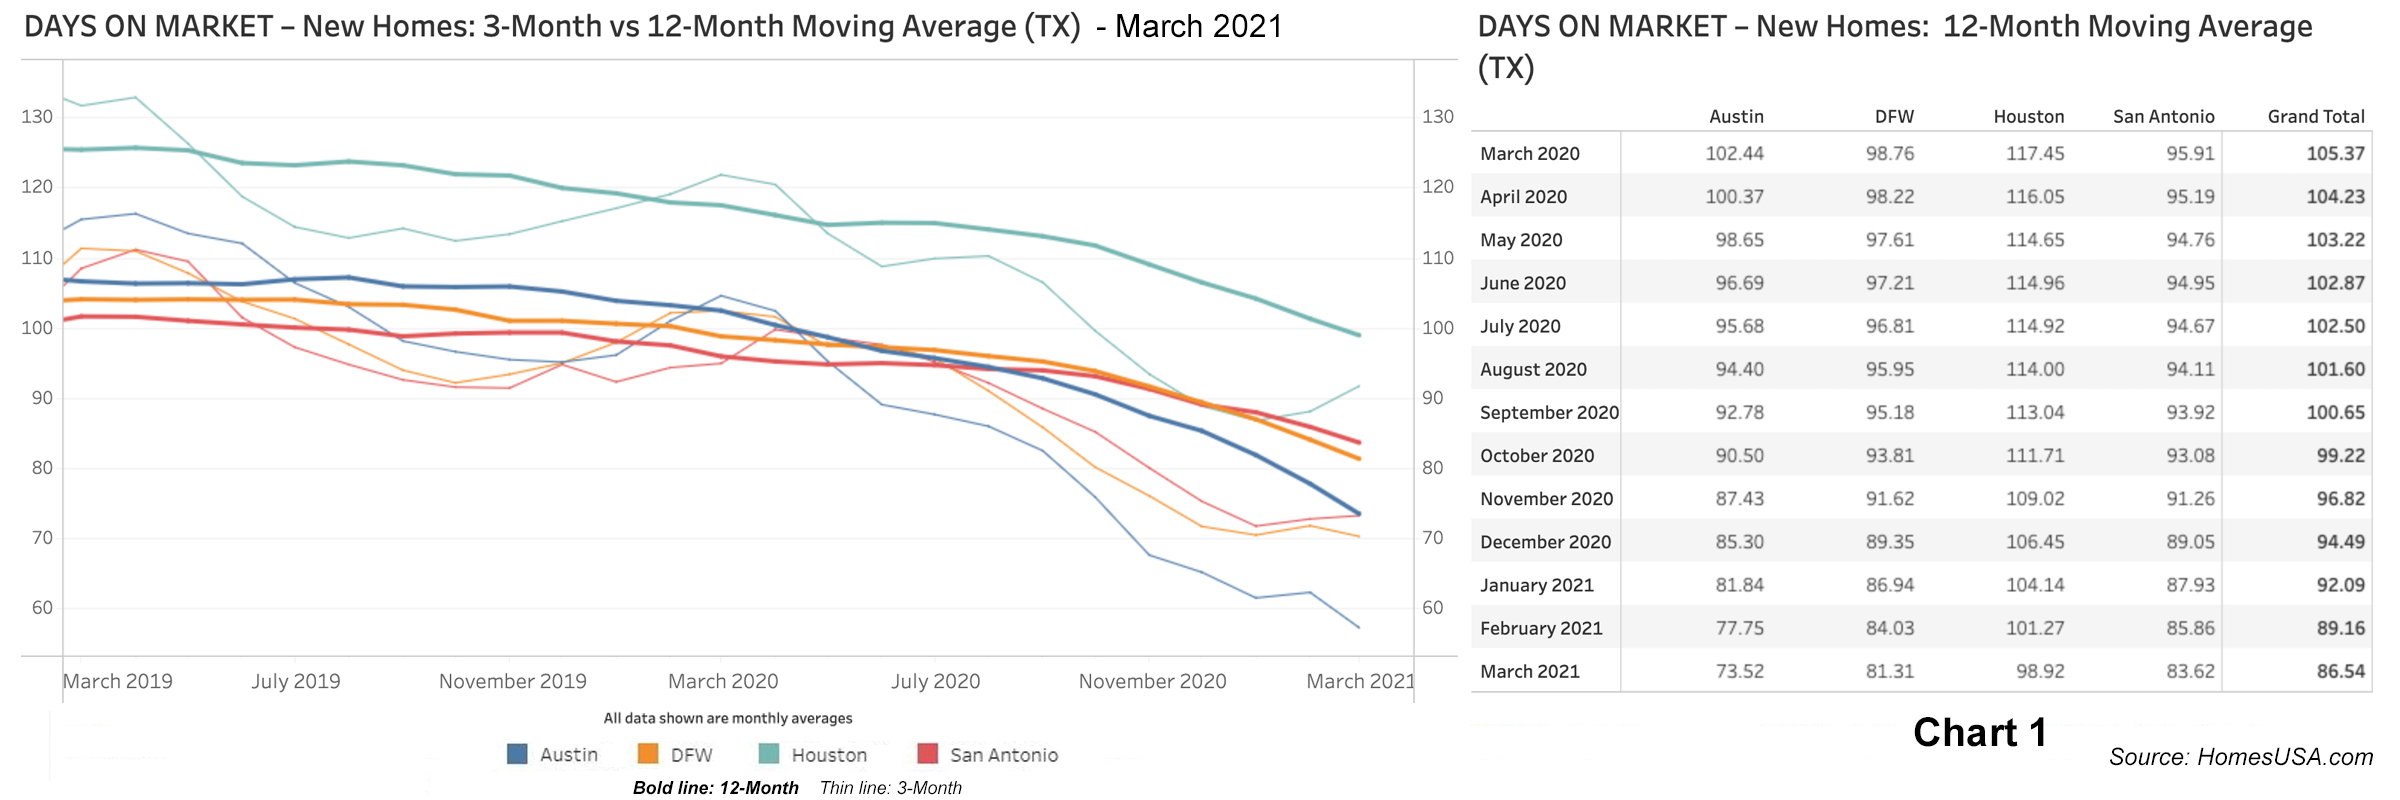 Chart 1: Texas New Homes: Days on Market - March 2021